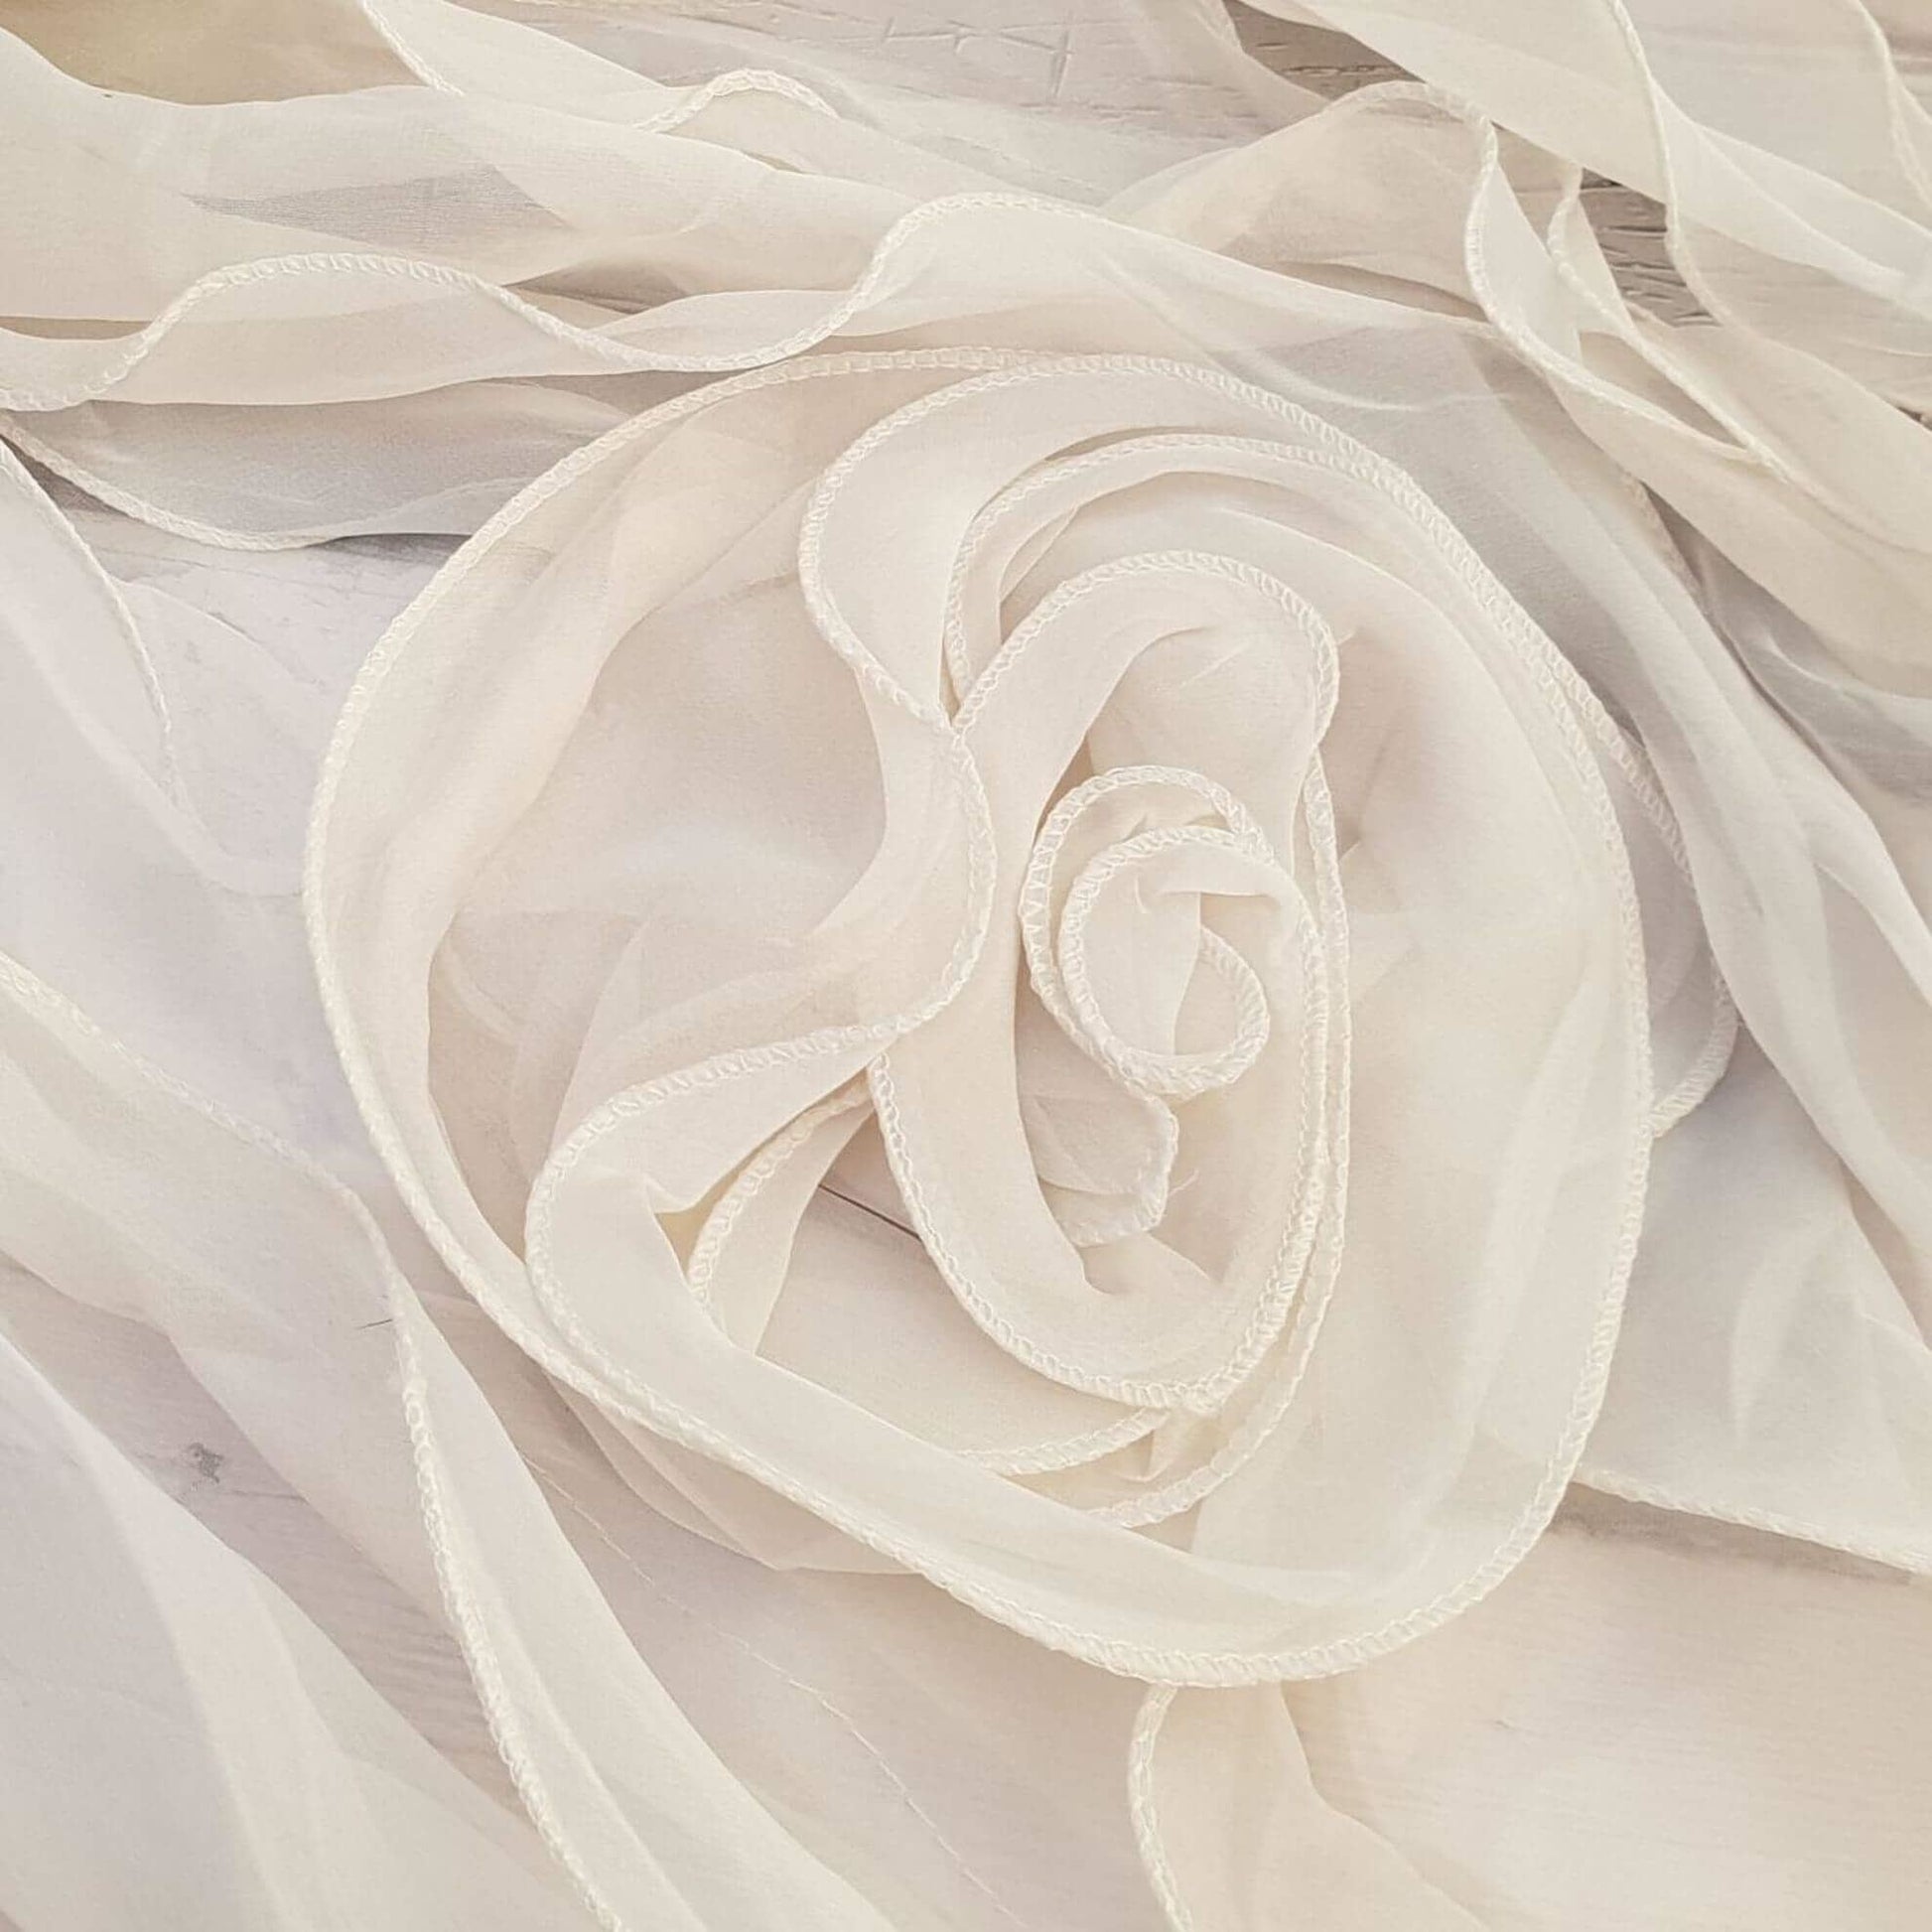 Photo of a cream scarf with rose feature